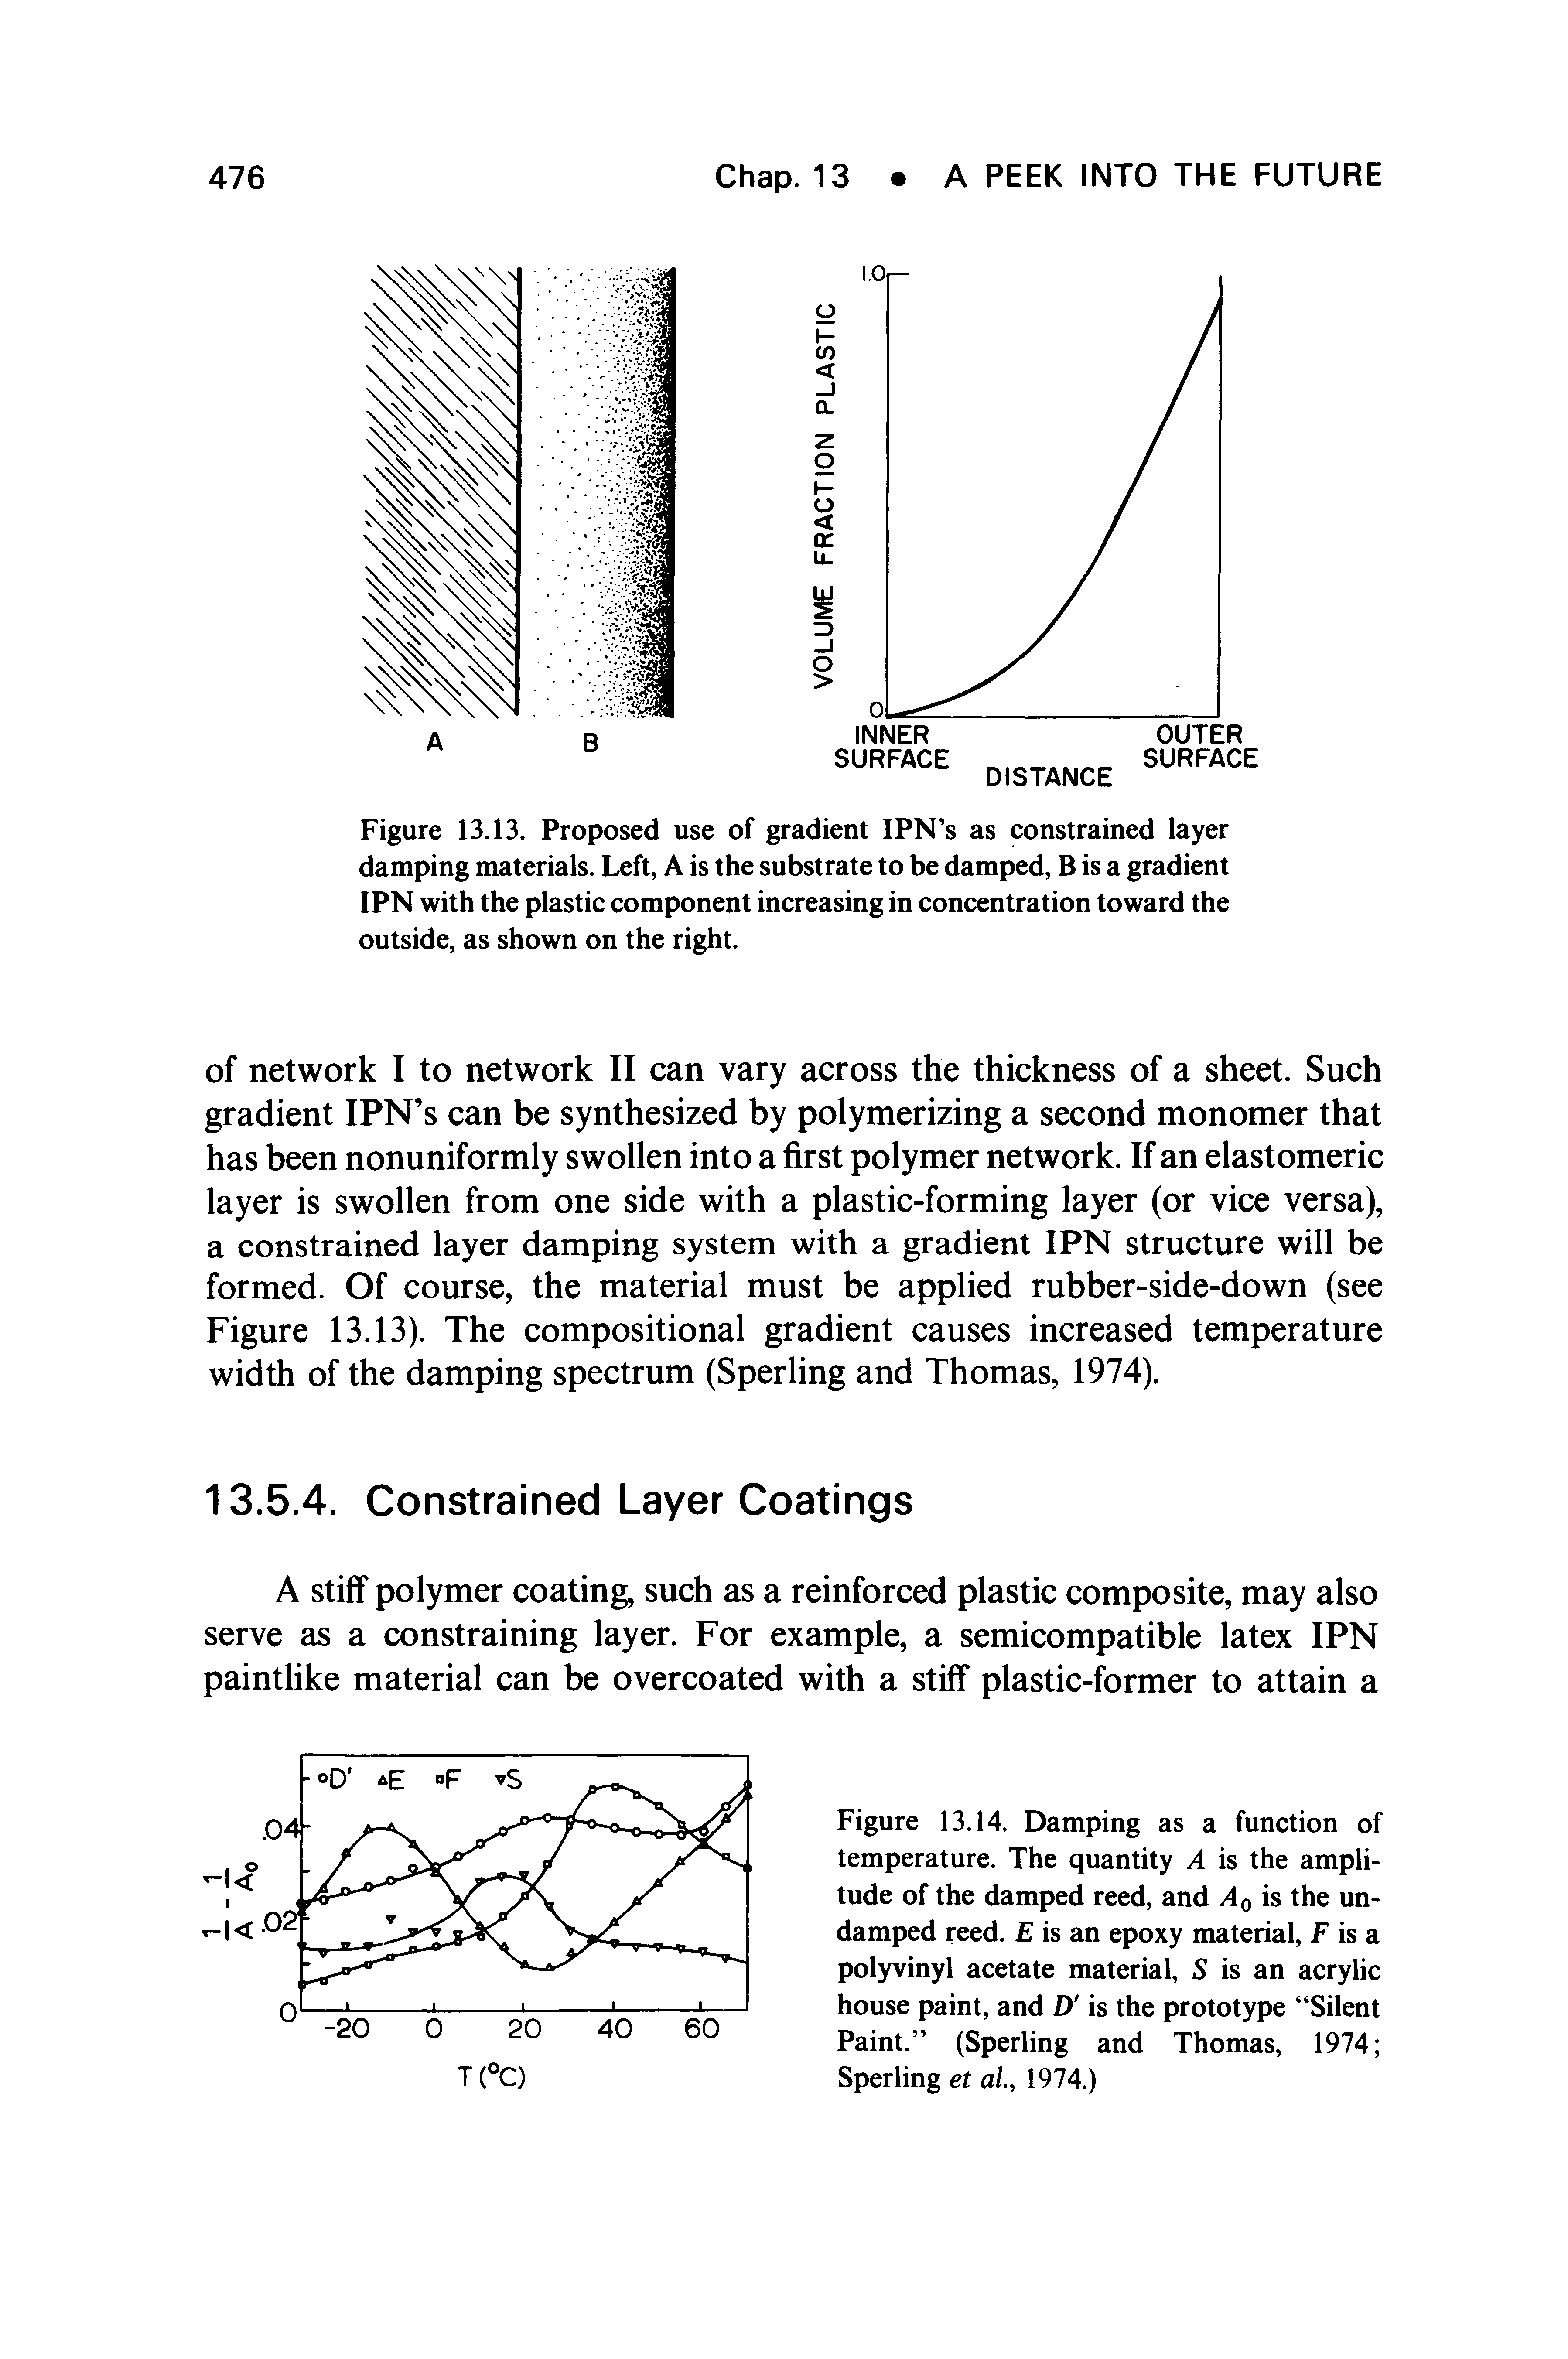 Figure 13.14. Damping as a function of temperature. The quantity A is the amplitude of the damped reed, and is the undamped reed. E is an epoxy material, F is a polyvinyl acetate material, S is an acrylic house paint, and D is the prototype Silent Paint. (Sperling and Thomas, 1974 Sperling et al, 1974.)...